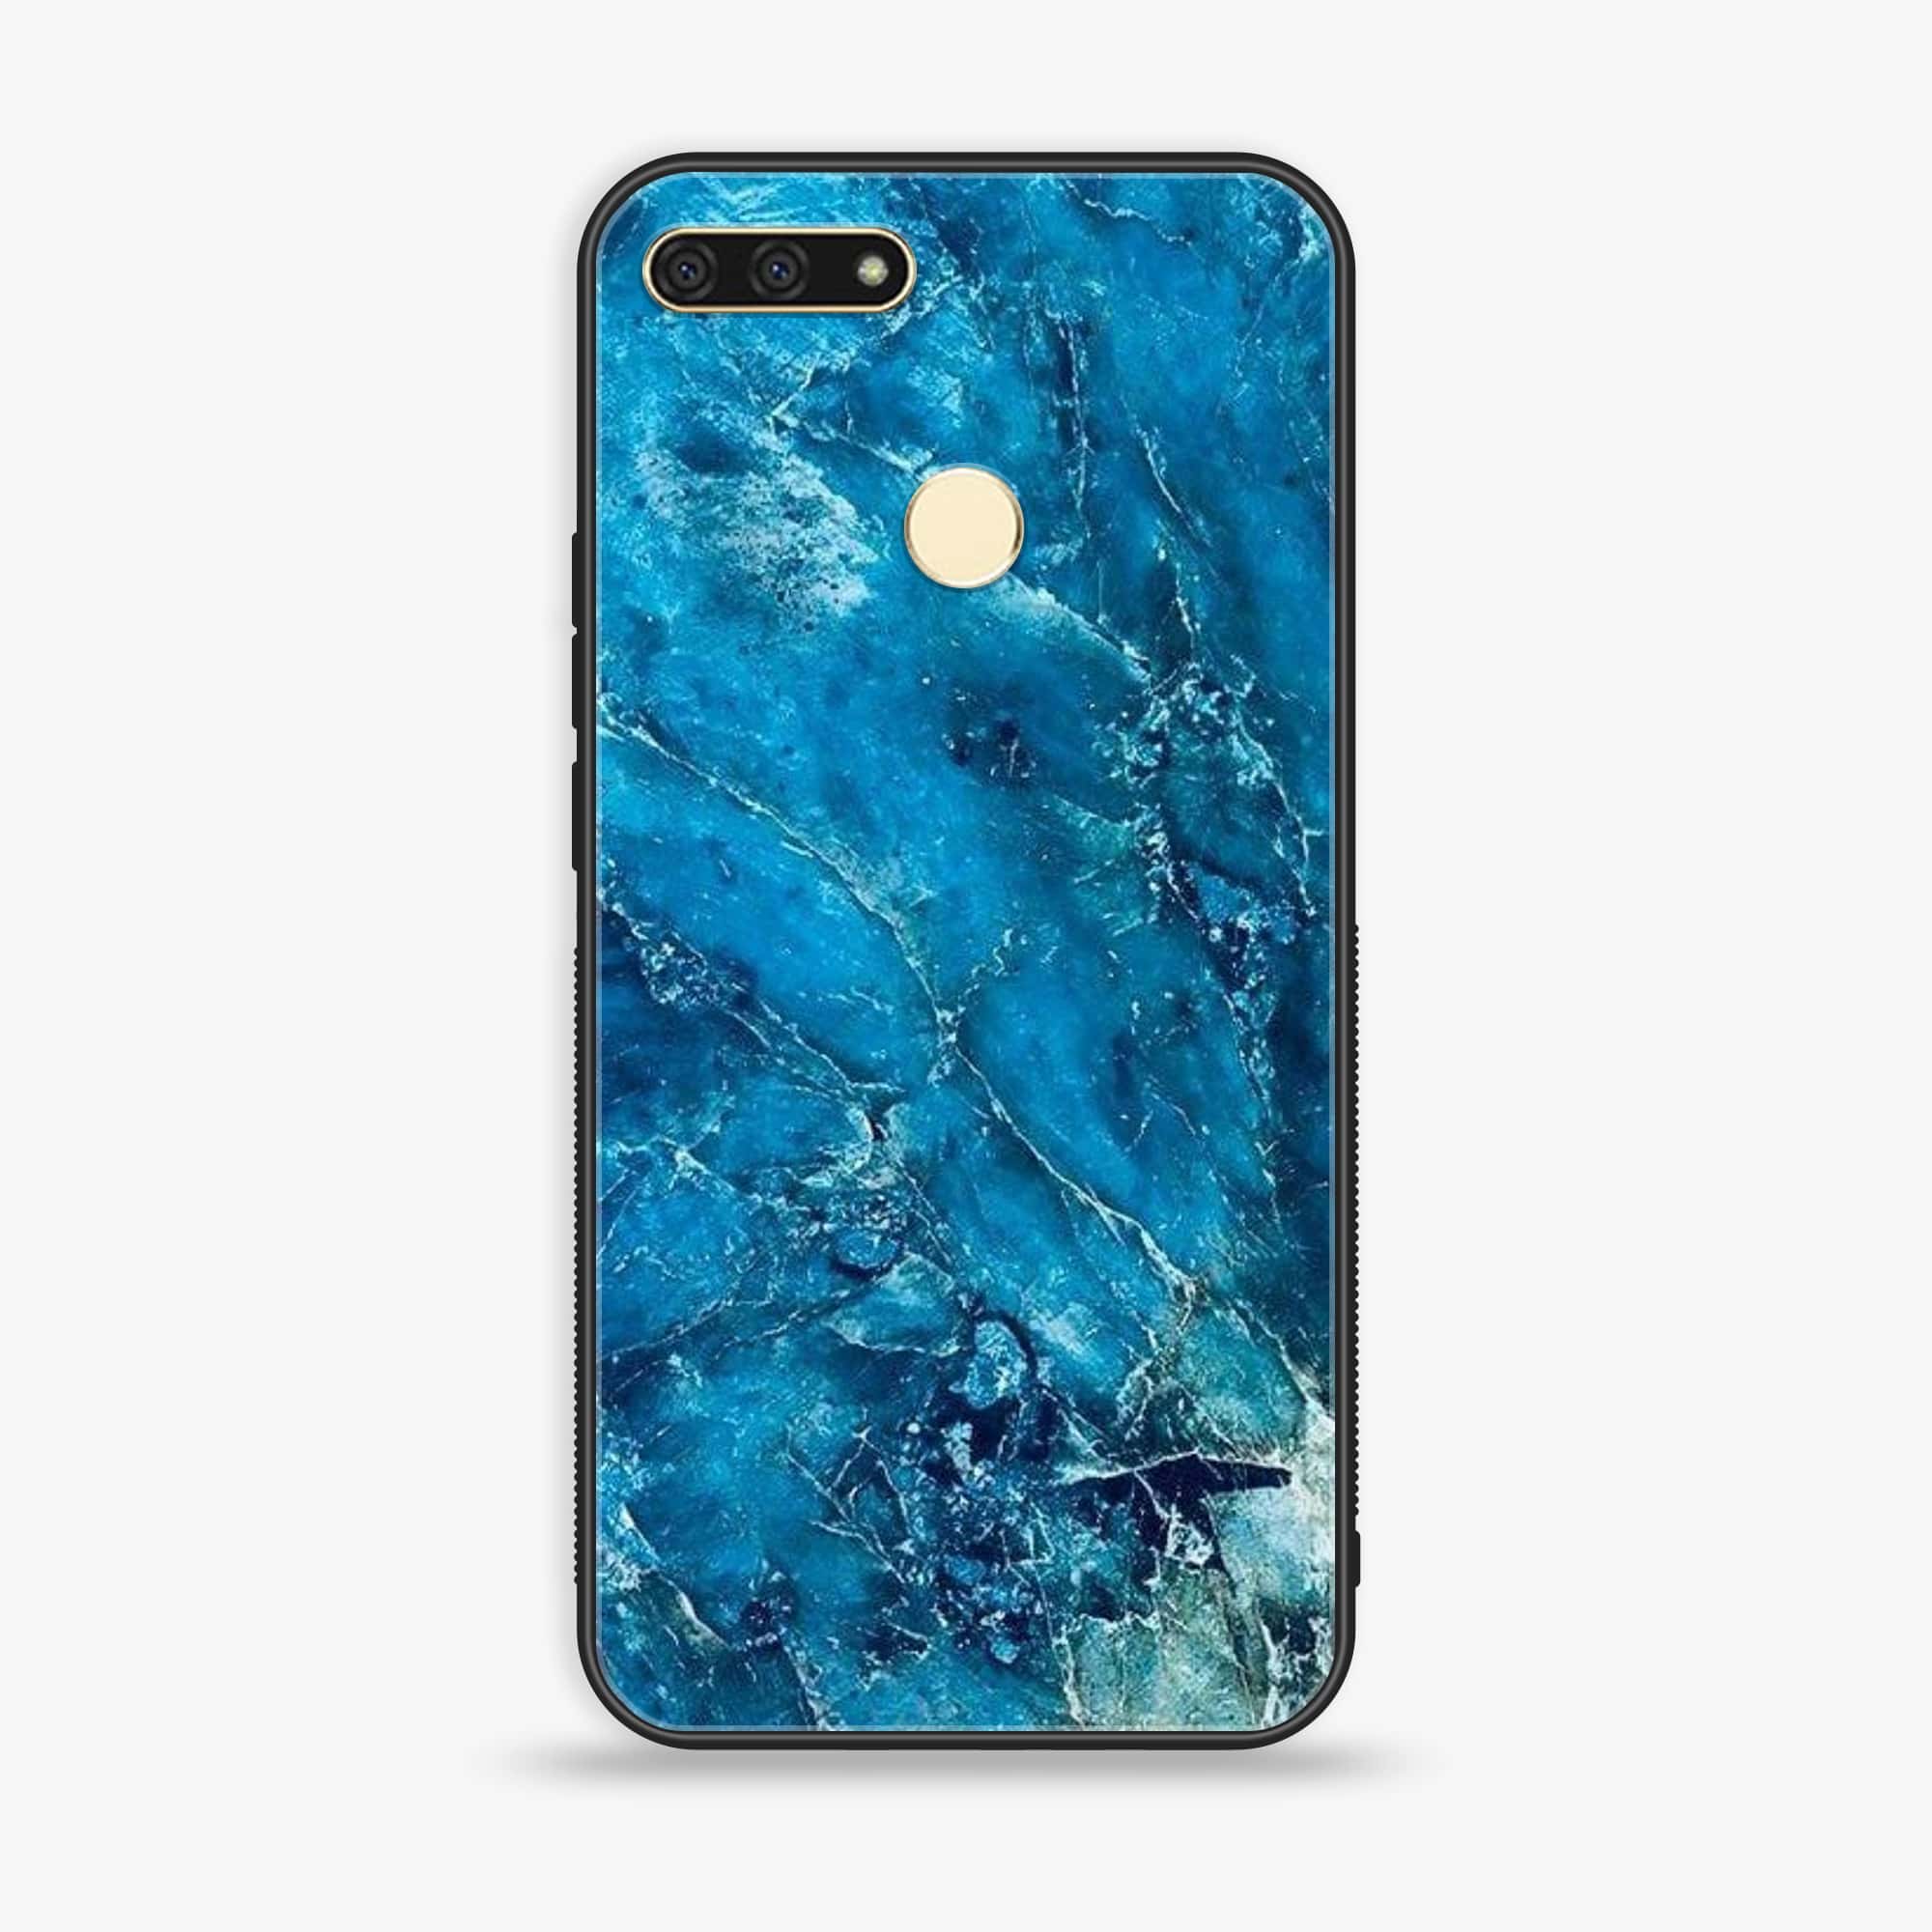 Huawei Y6 2018/Honor Play 7A - Blue Marble Series V 2.0  - Premium Printed Glass soft Bumper shock Proof Case